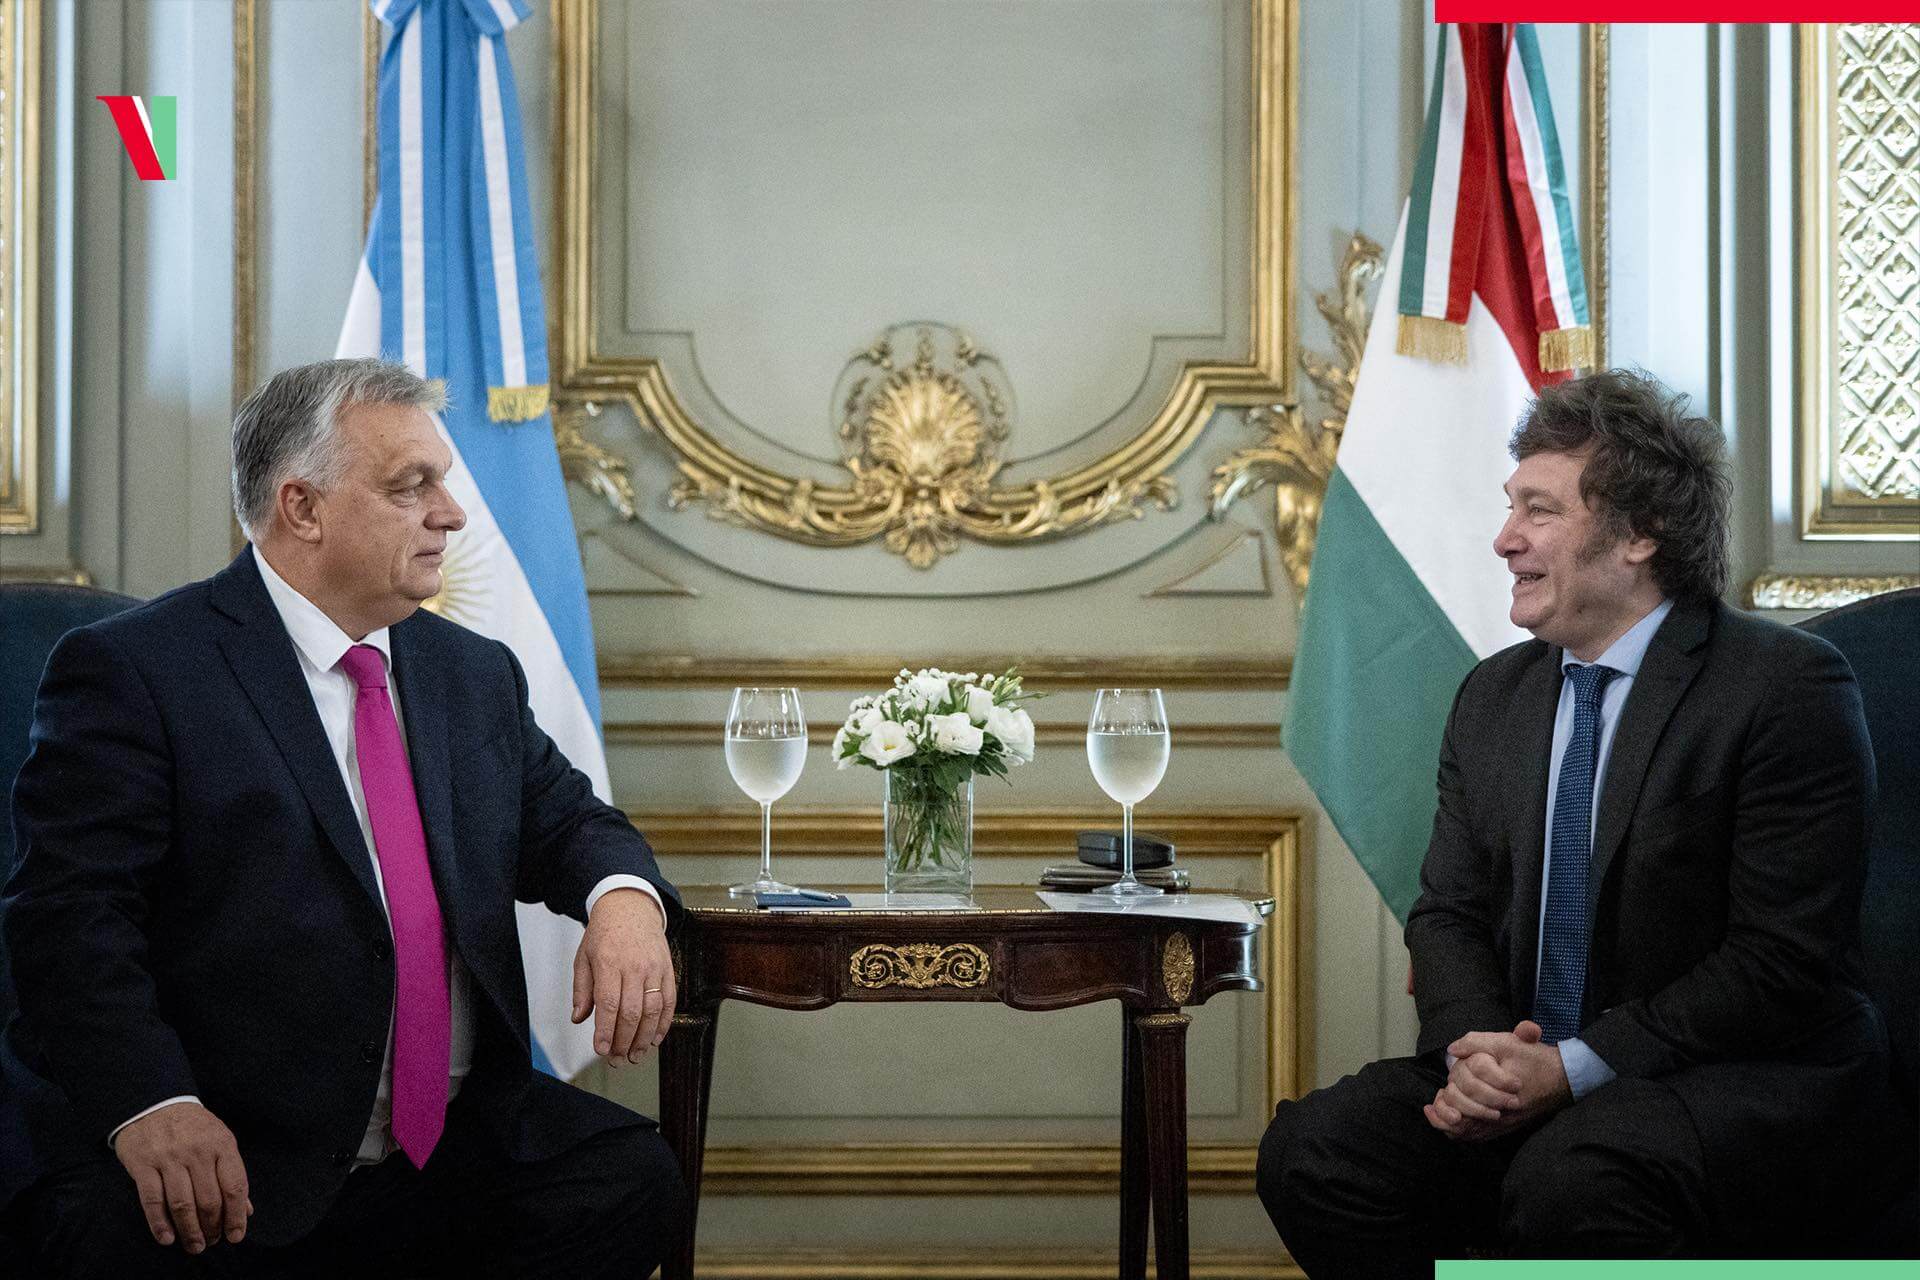 Orbán Travels to Argentina to Attend Milei's Inauguration, Meet Bolsonaro